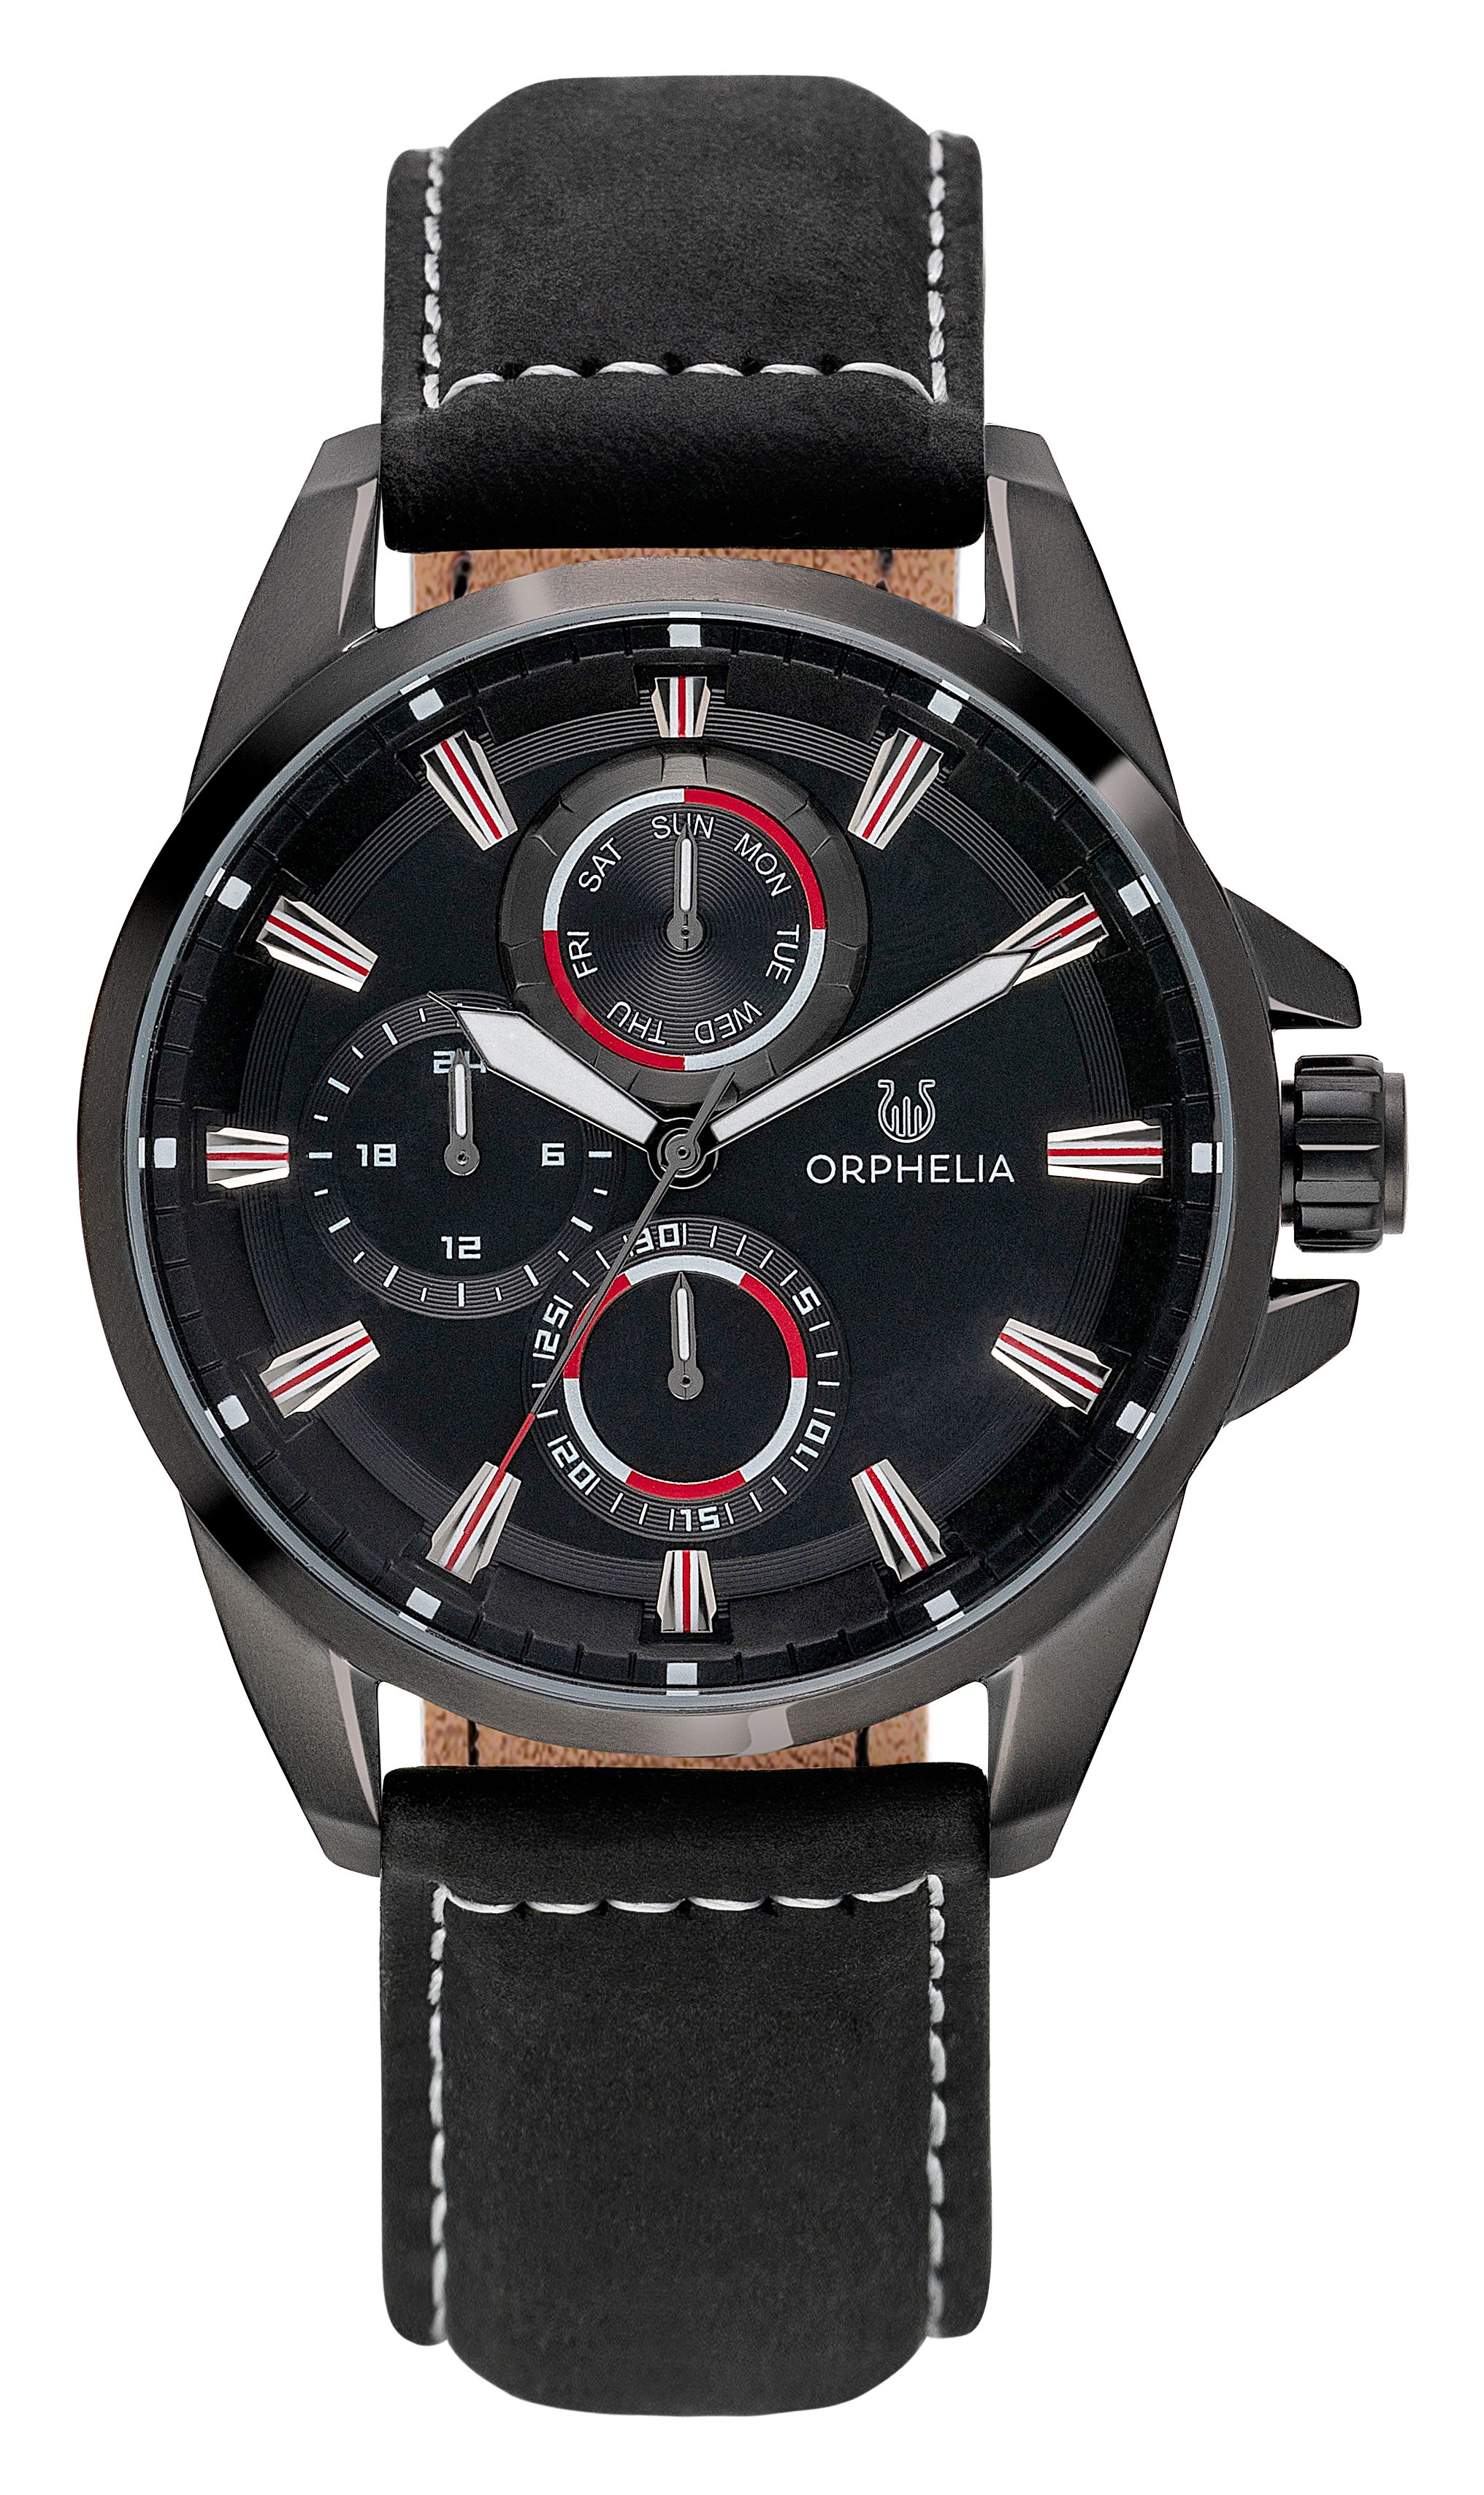 This Orphelia Eddington Multi Dial Watch for Men is the perfect timepiece to wear or to gift. It's Gun 44 mm Round case combined with the comfortable Black Genuine Leather watch band will ensure you enjoy this stunning timepiece without any compromise. Operated by a high quality Quartz movement and water resistant to 3 bars, your watch will keep ticking. SOPHISTICATED DESIGN: ORPHELIA Eddington Multi dial watch with a Miyota Quartz movement includes a Date and 24-hour display and has an expensive leather strap. This watch features Luminous Hands & Numerals. Wear this Special designed watch daily as a polished yet functional finish PREMIUM QUALITY: By using high-quality materials  Glass: Mineral Glass  Case material: Stainless steel  Bracelet material: Leather - Water resistant: 3 bars COMPACT SIZE: Case diameter: 44 mm  Height: 12 mm  Strap- Length: 22 cm  Width: 20 mm. Due to this practical handy size  the watch is absolutely for everyday use-Weight: 88 g